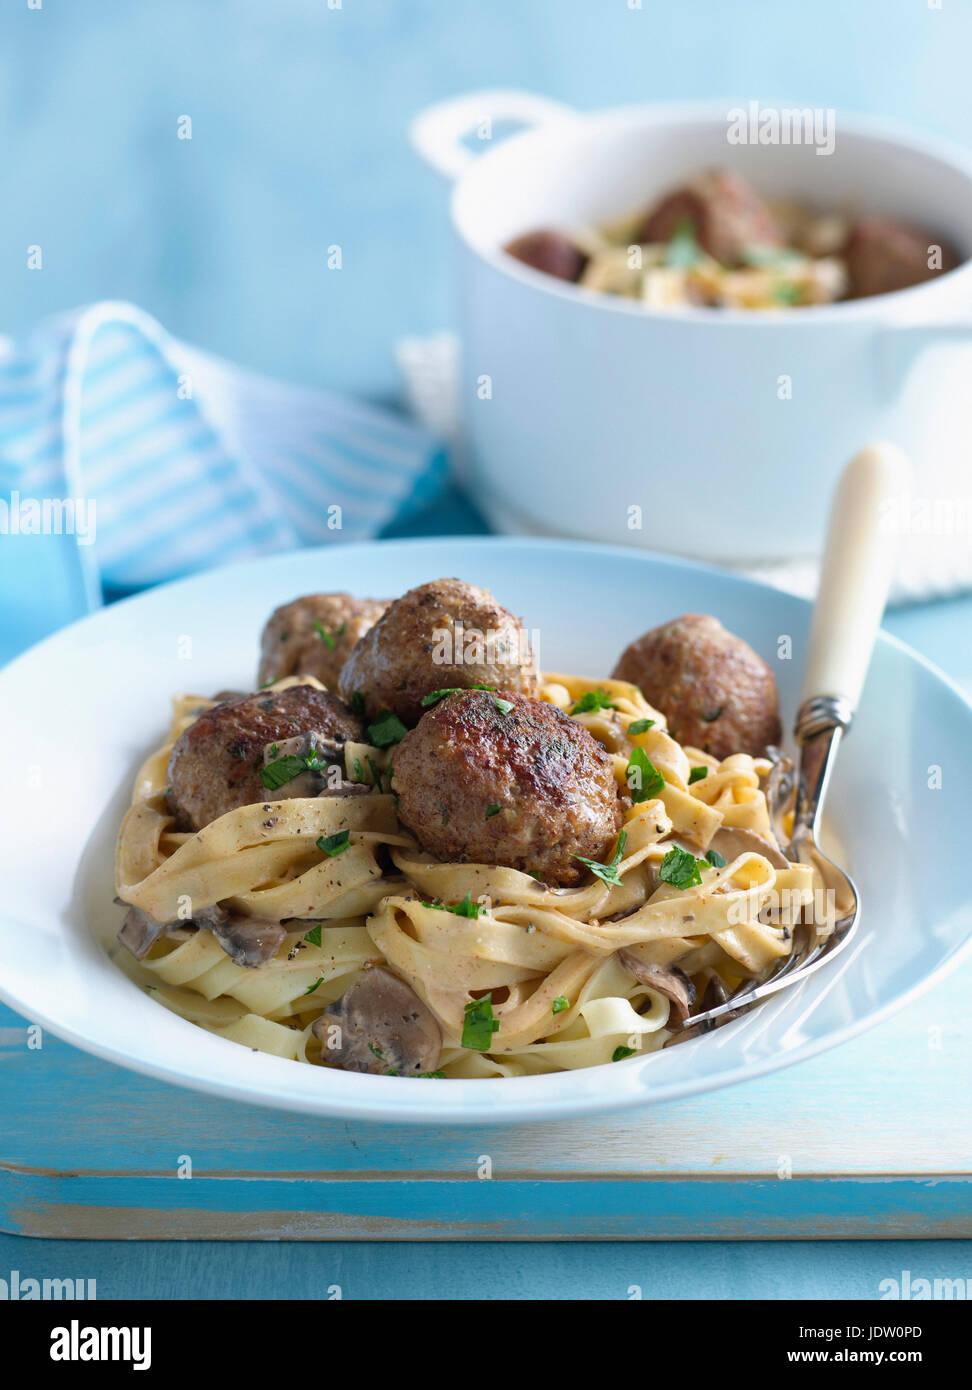 Bowl of pasta with meatballs Stock Photo